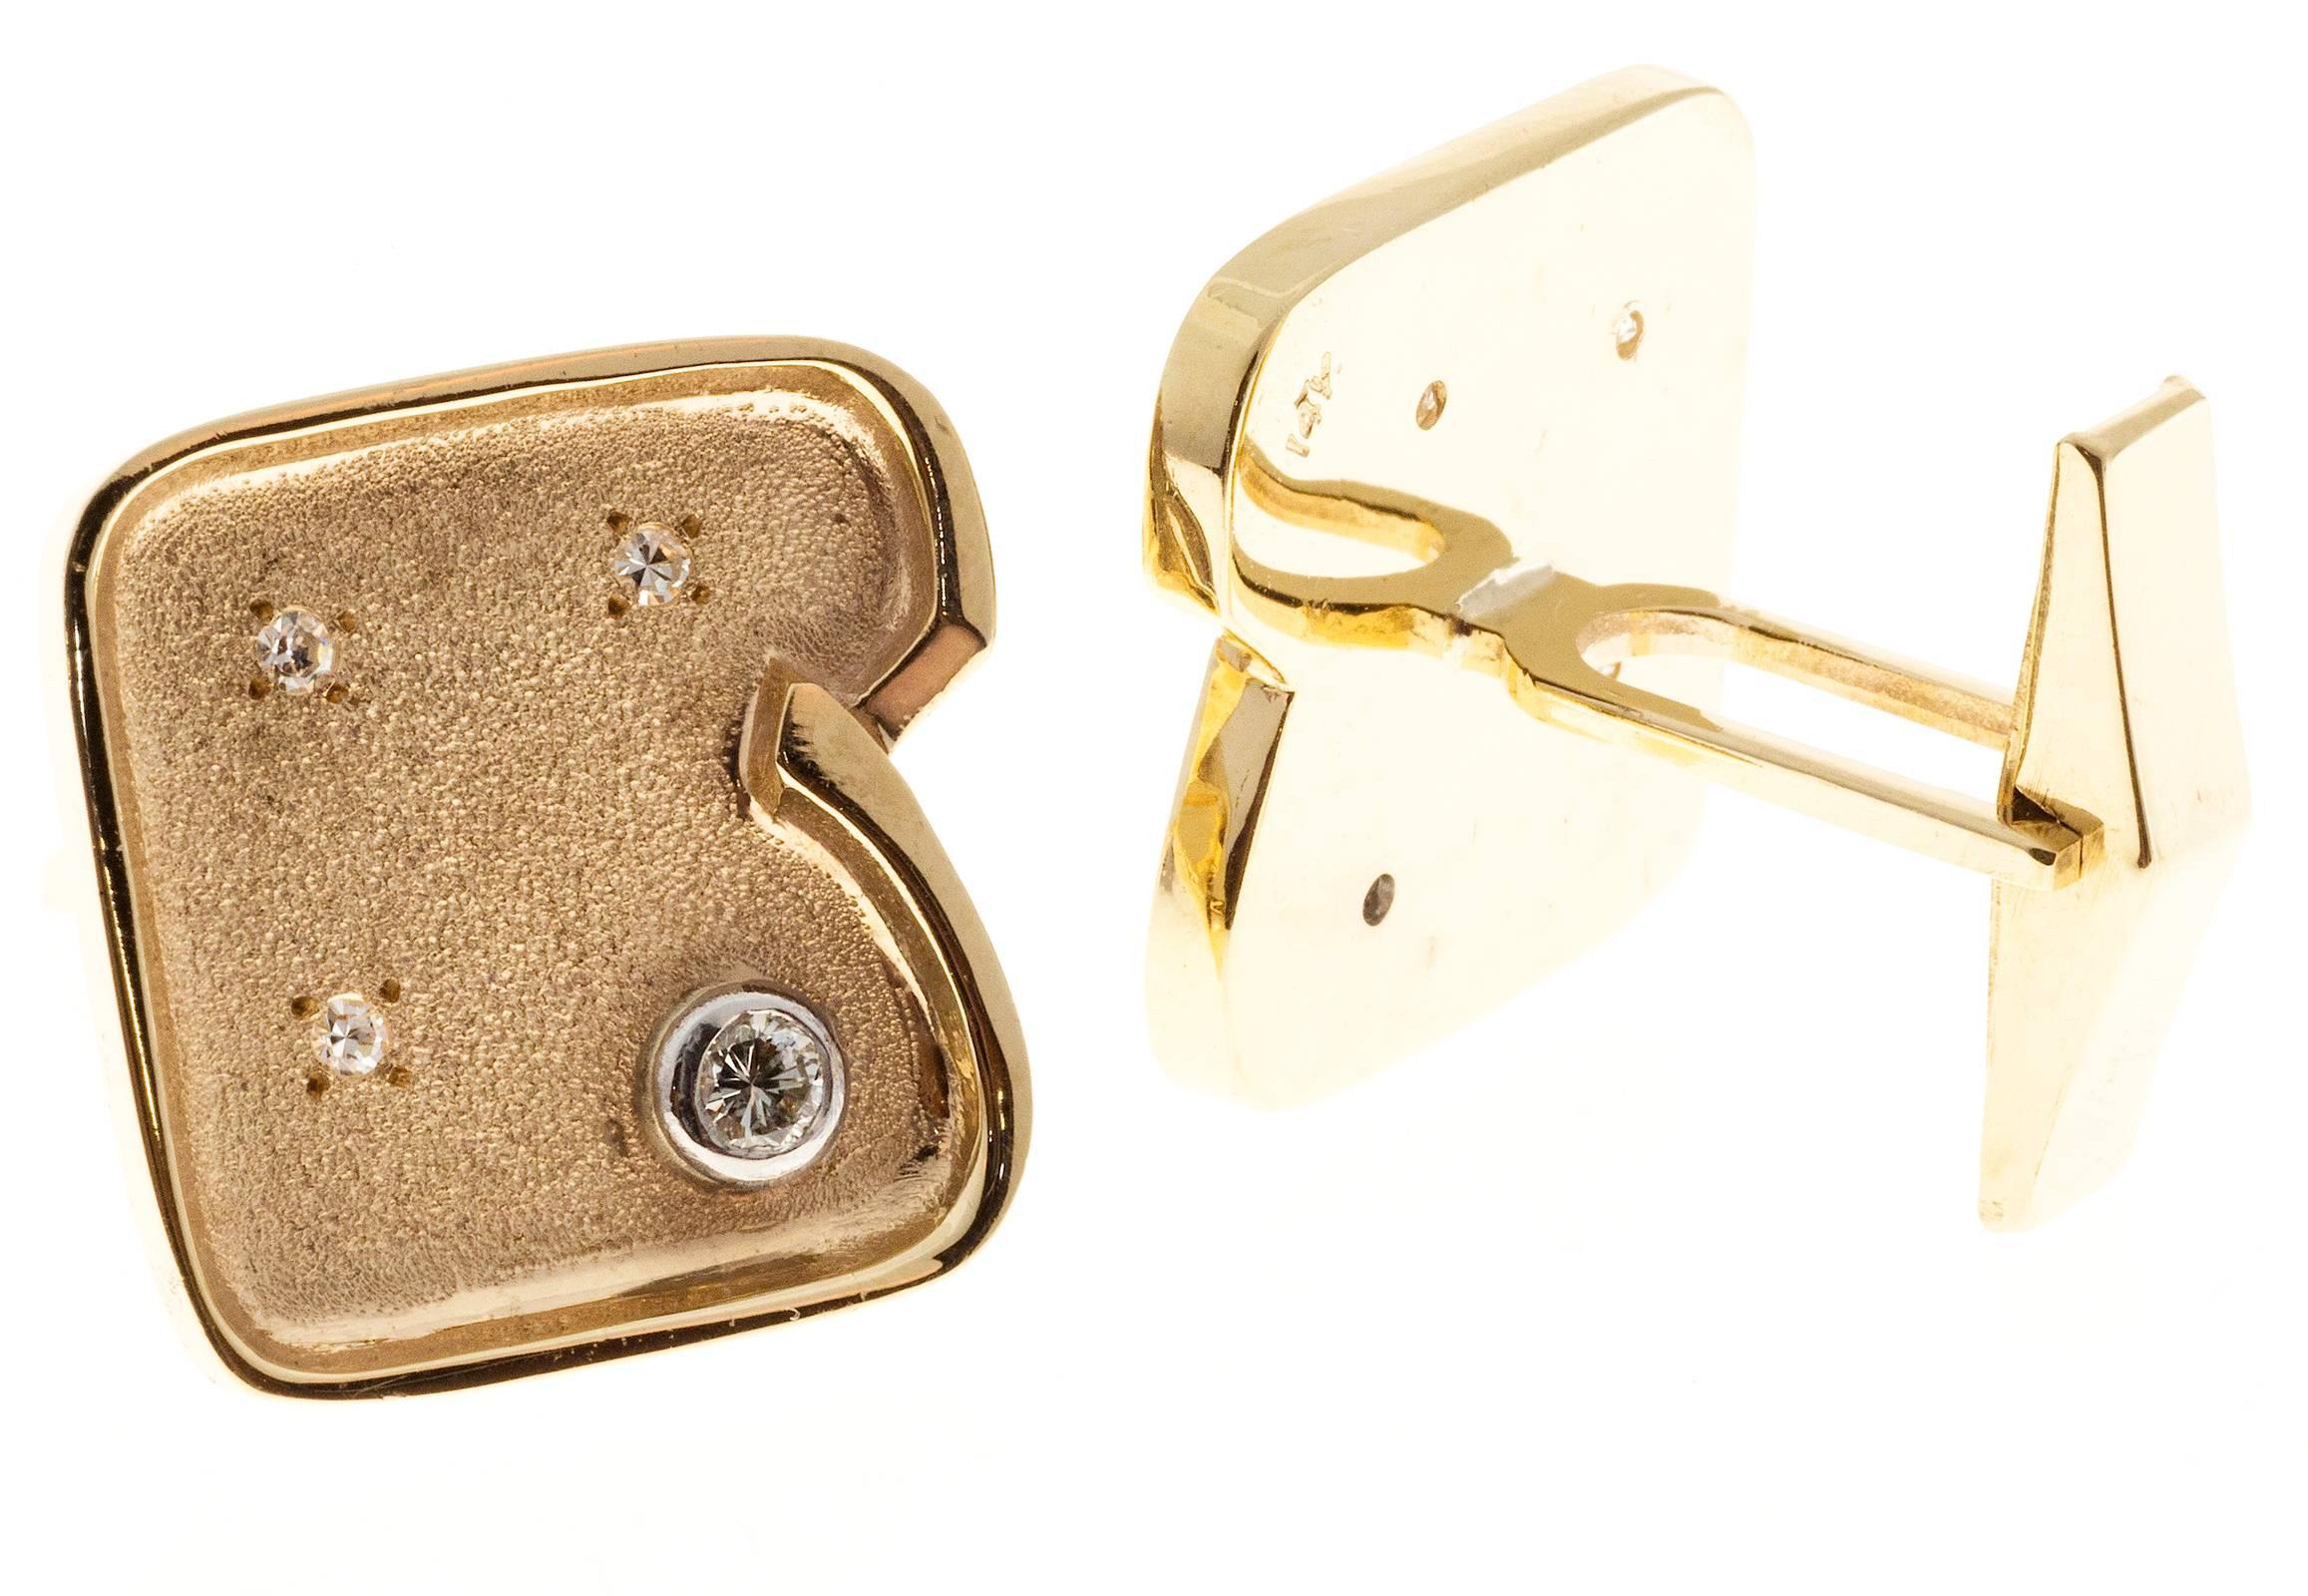 14k yellow gold cufflinks circa 1960’s with textured centers.  Set with full cut diamonds in bezels and bead set with single cut diamonds.  Clip style backs.

2 round diamonds approx. total weight .26cts
6 round diamonds approx. total weight